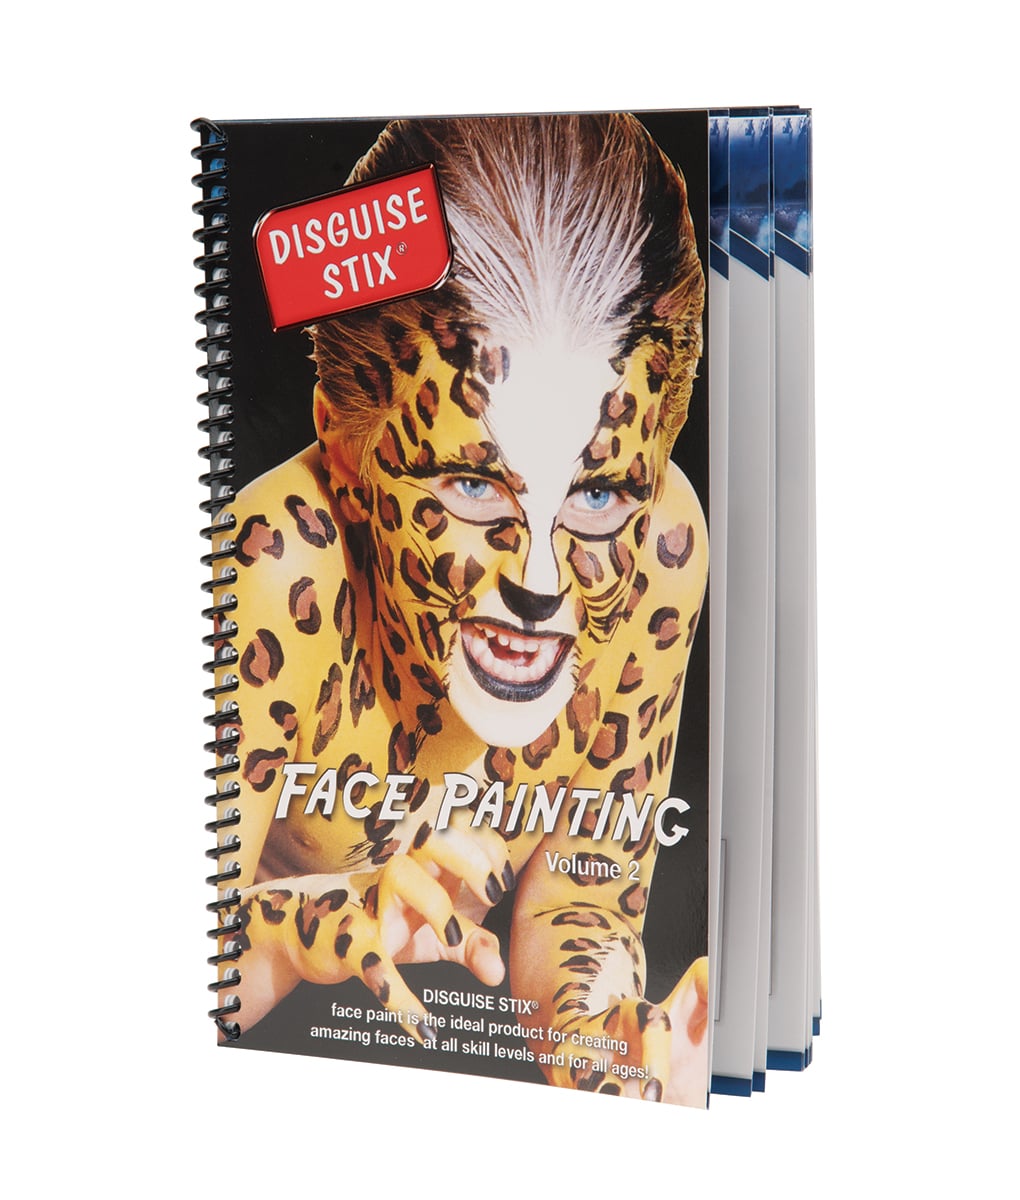 Cosplay Makeup: Makeup Design And Practice Book - Allows Makeup Artists to  design and practice their deigns on paper first.